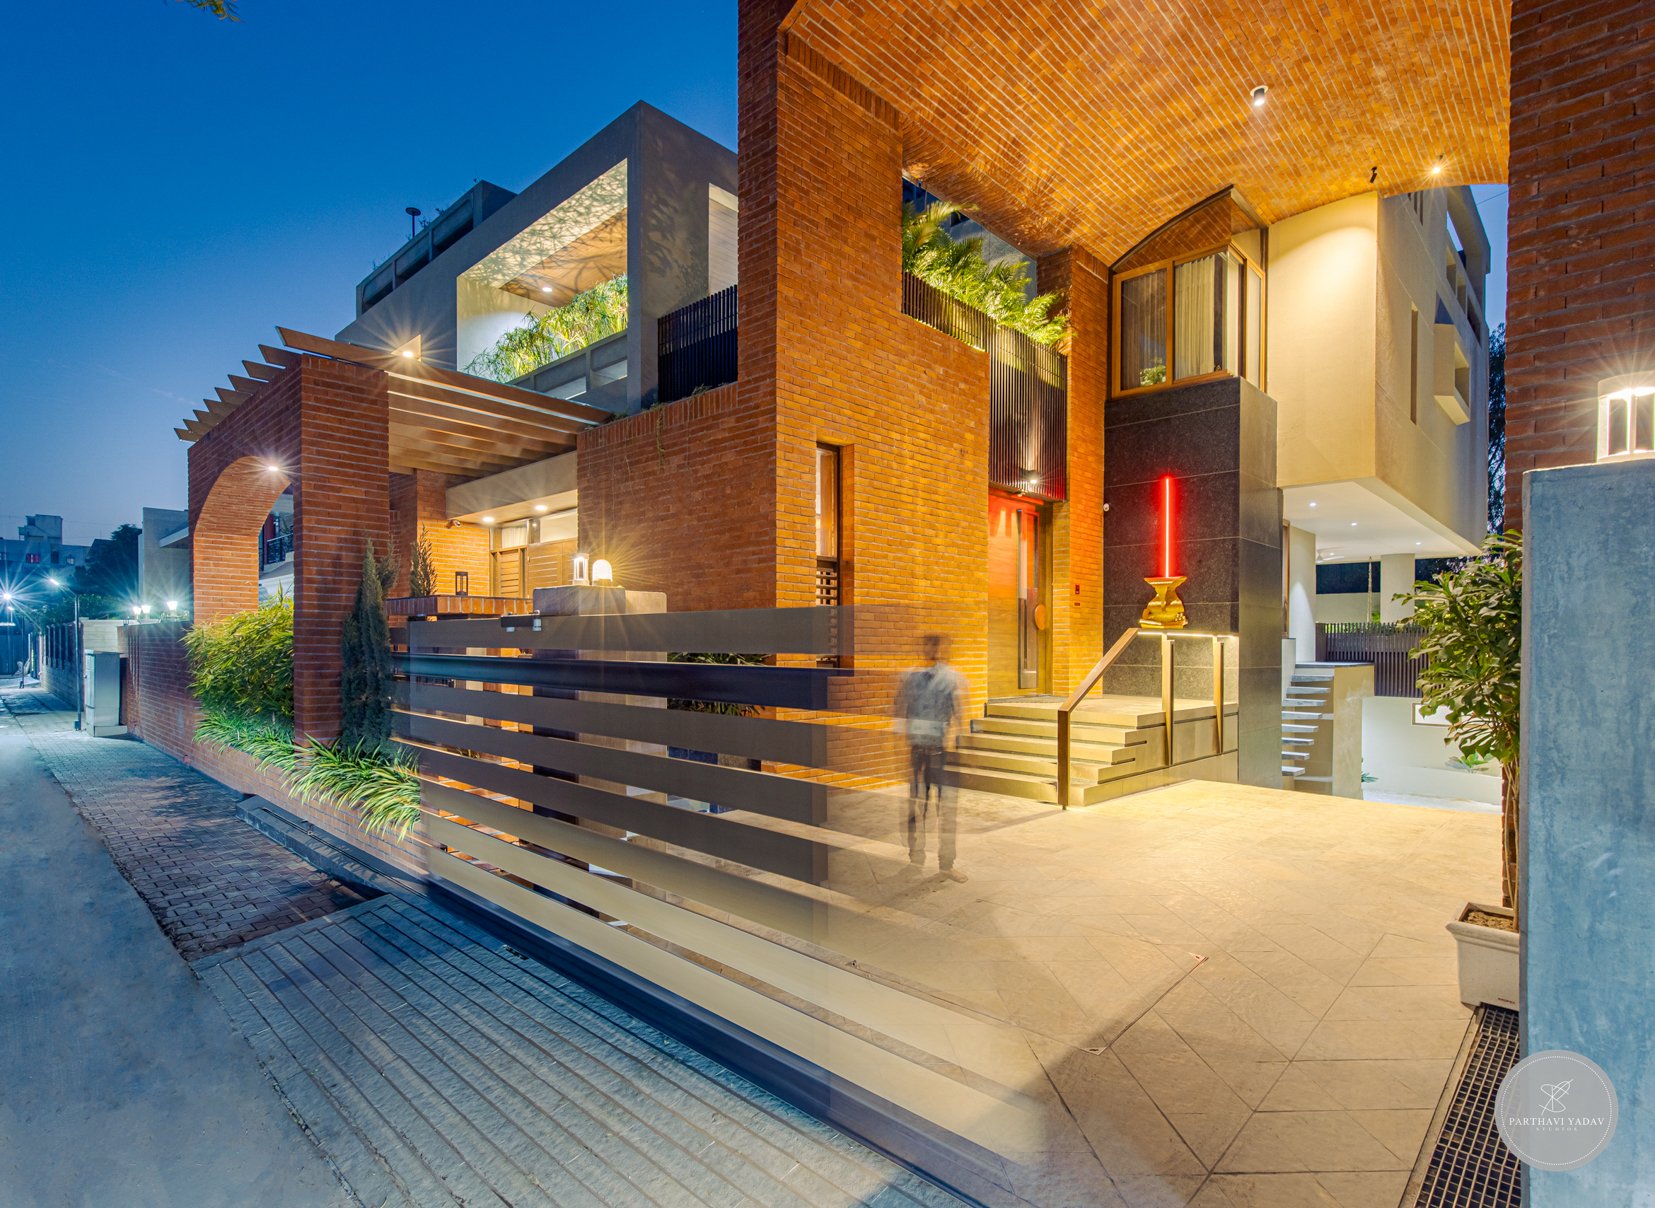 best interior photographer in pune bangalore - exposed brick facade for a bungalow in evening sunset light.jpg